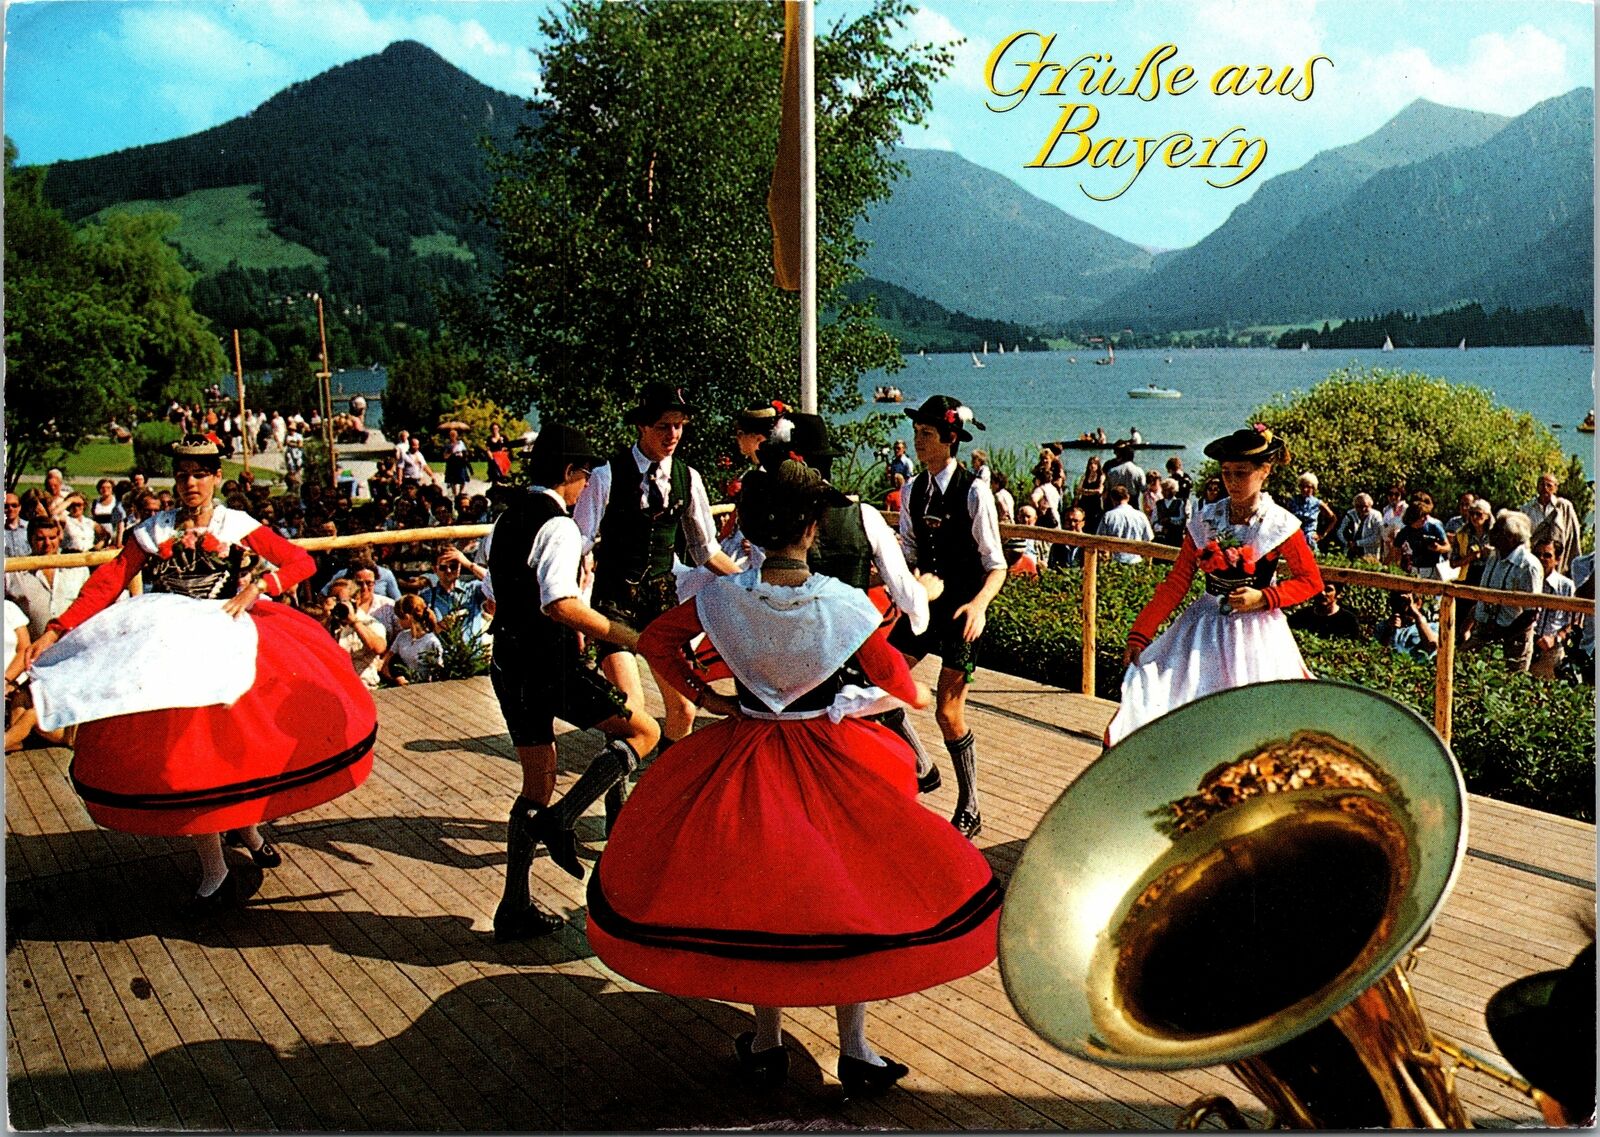 VINTAGE CONTINENTAL SIZE POSTCARD CULTURAL DANCING GREETINGS FROM BAYERN GERMANY